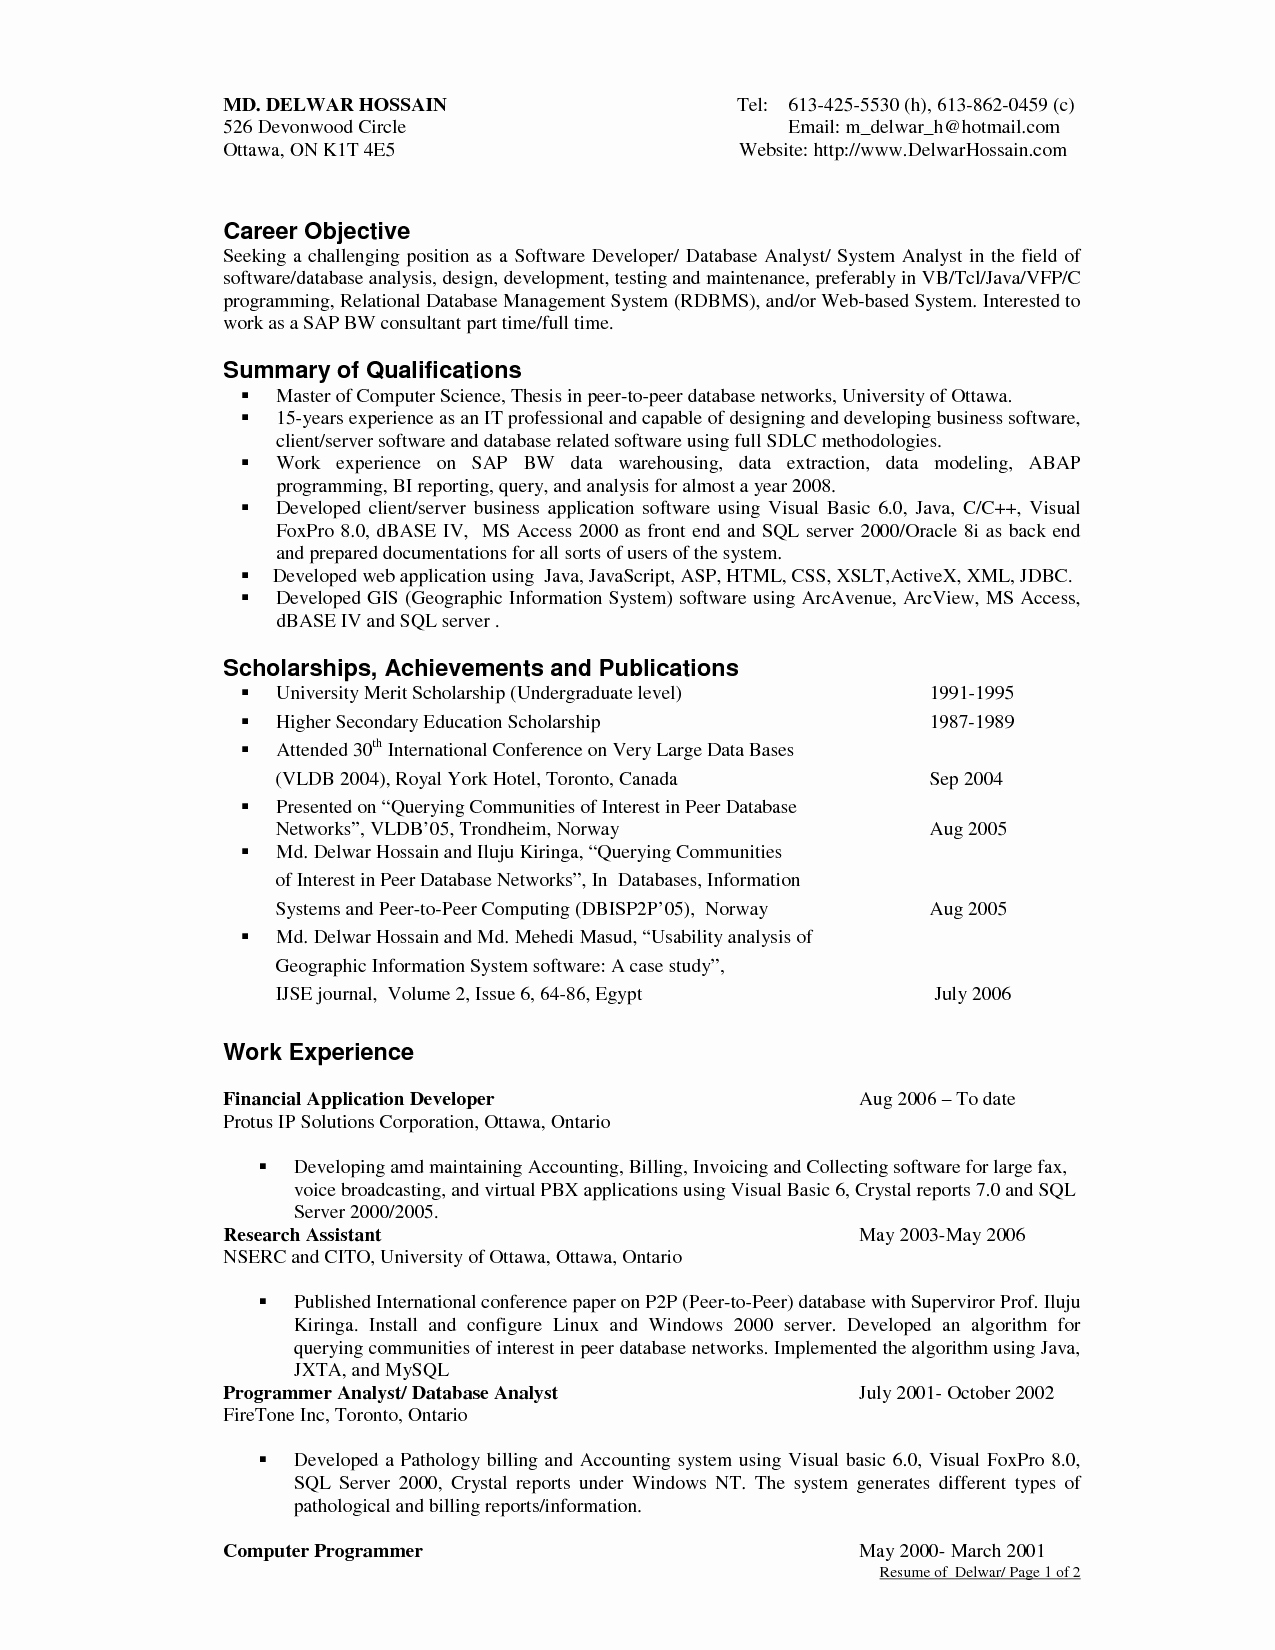 Resume Objective Best Templateresume Objective Examples